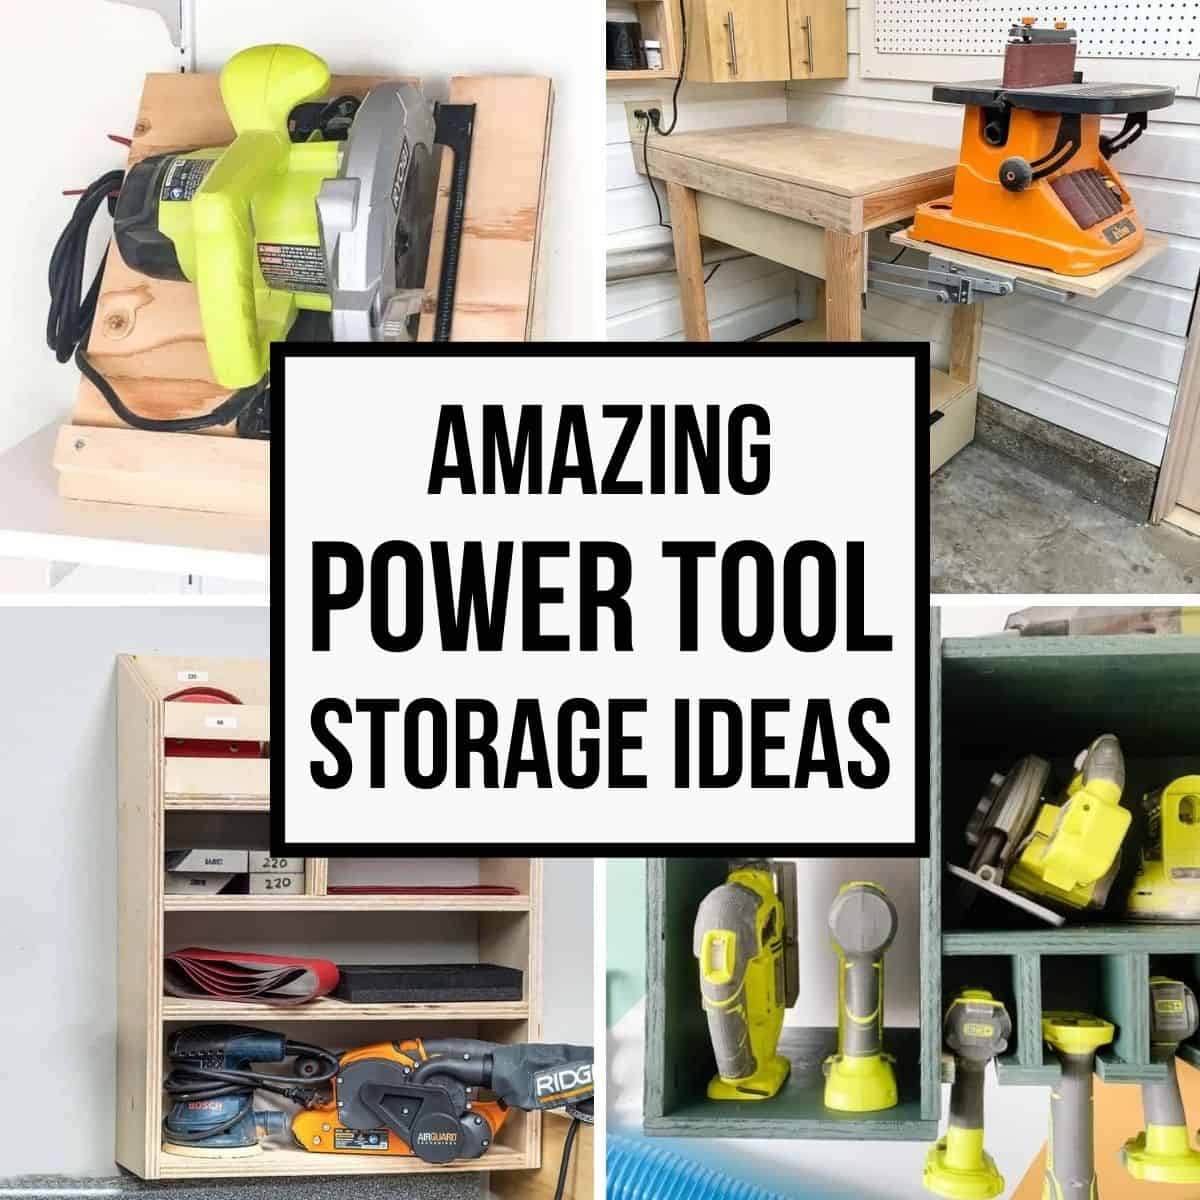 https://www.thehandymansdaughter.com/wp-content/uploads/2022/04/power-tool-storage-ideas-featured-square.jpg